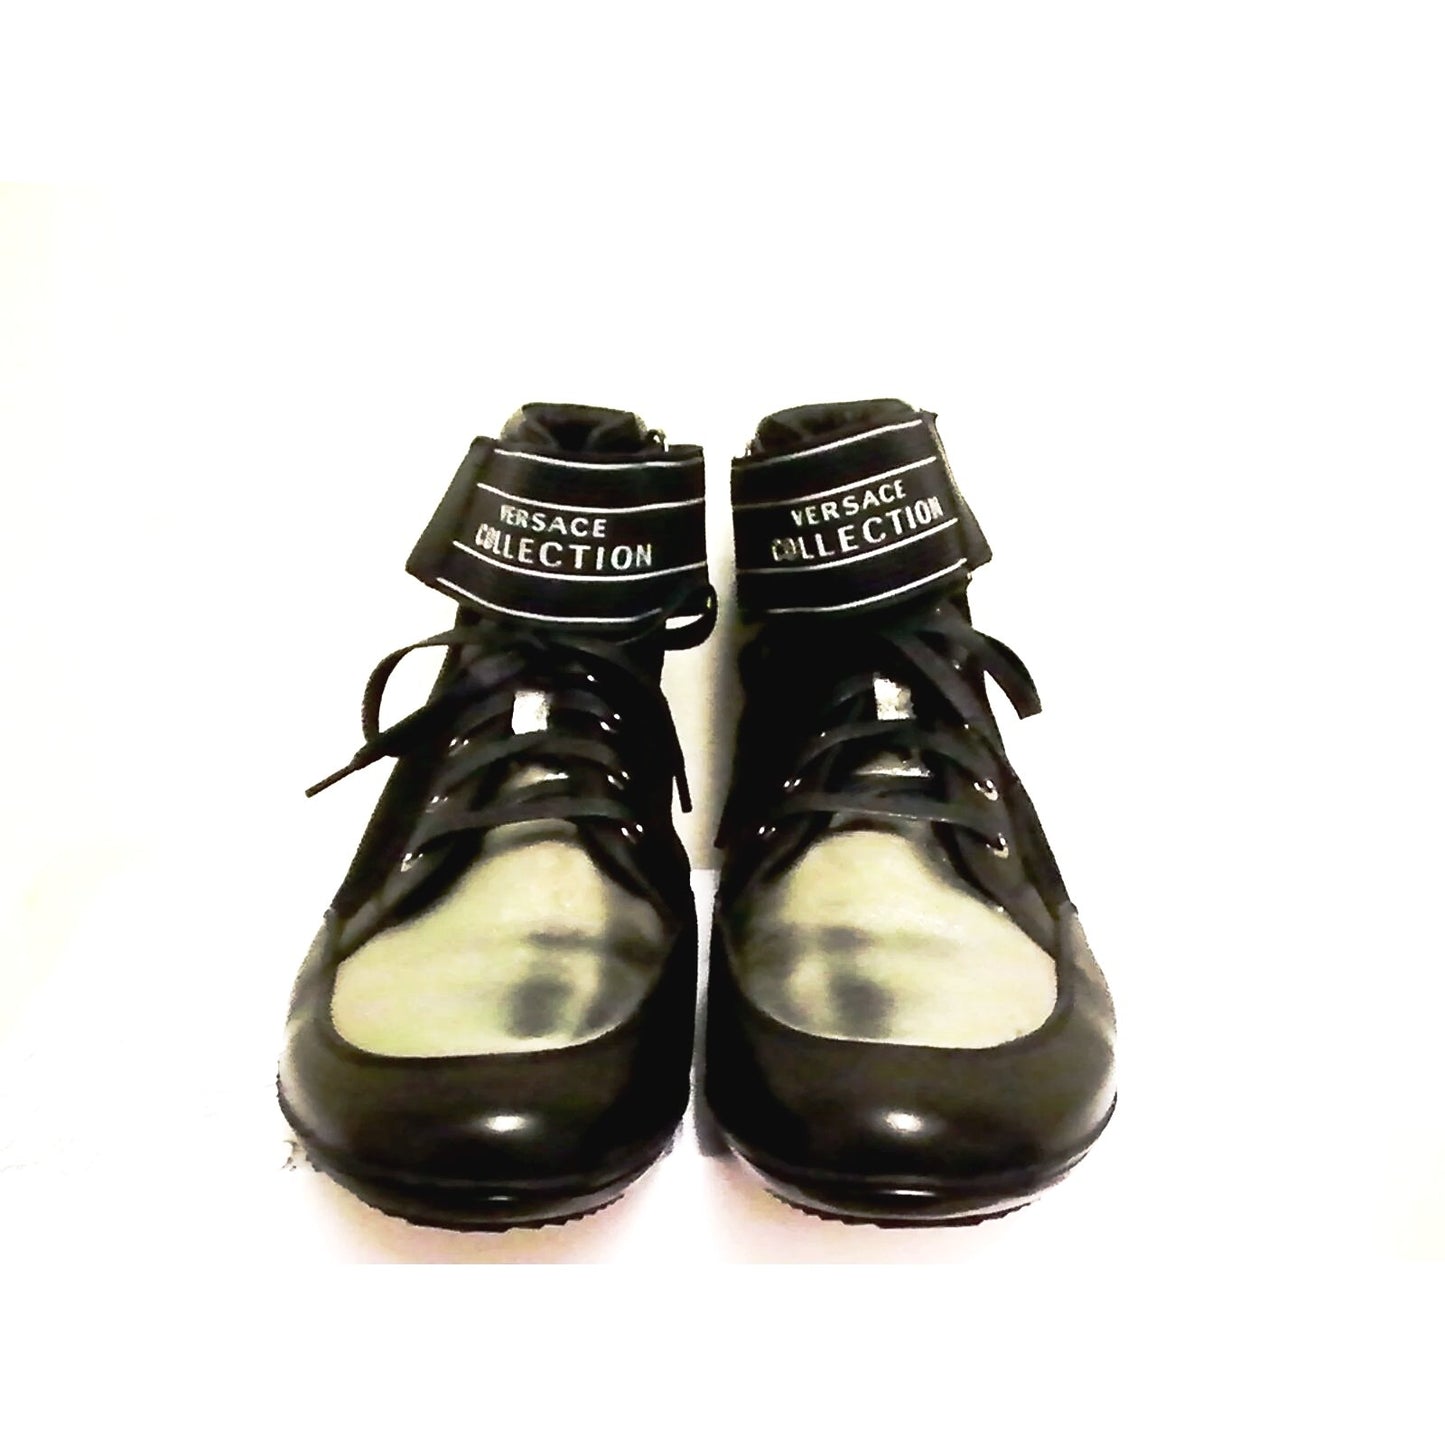 Versace mens shoes collection casual High size 42 euro new with box